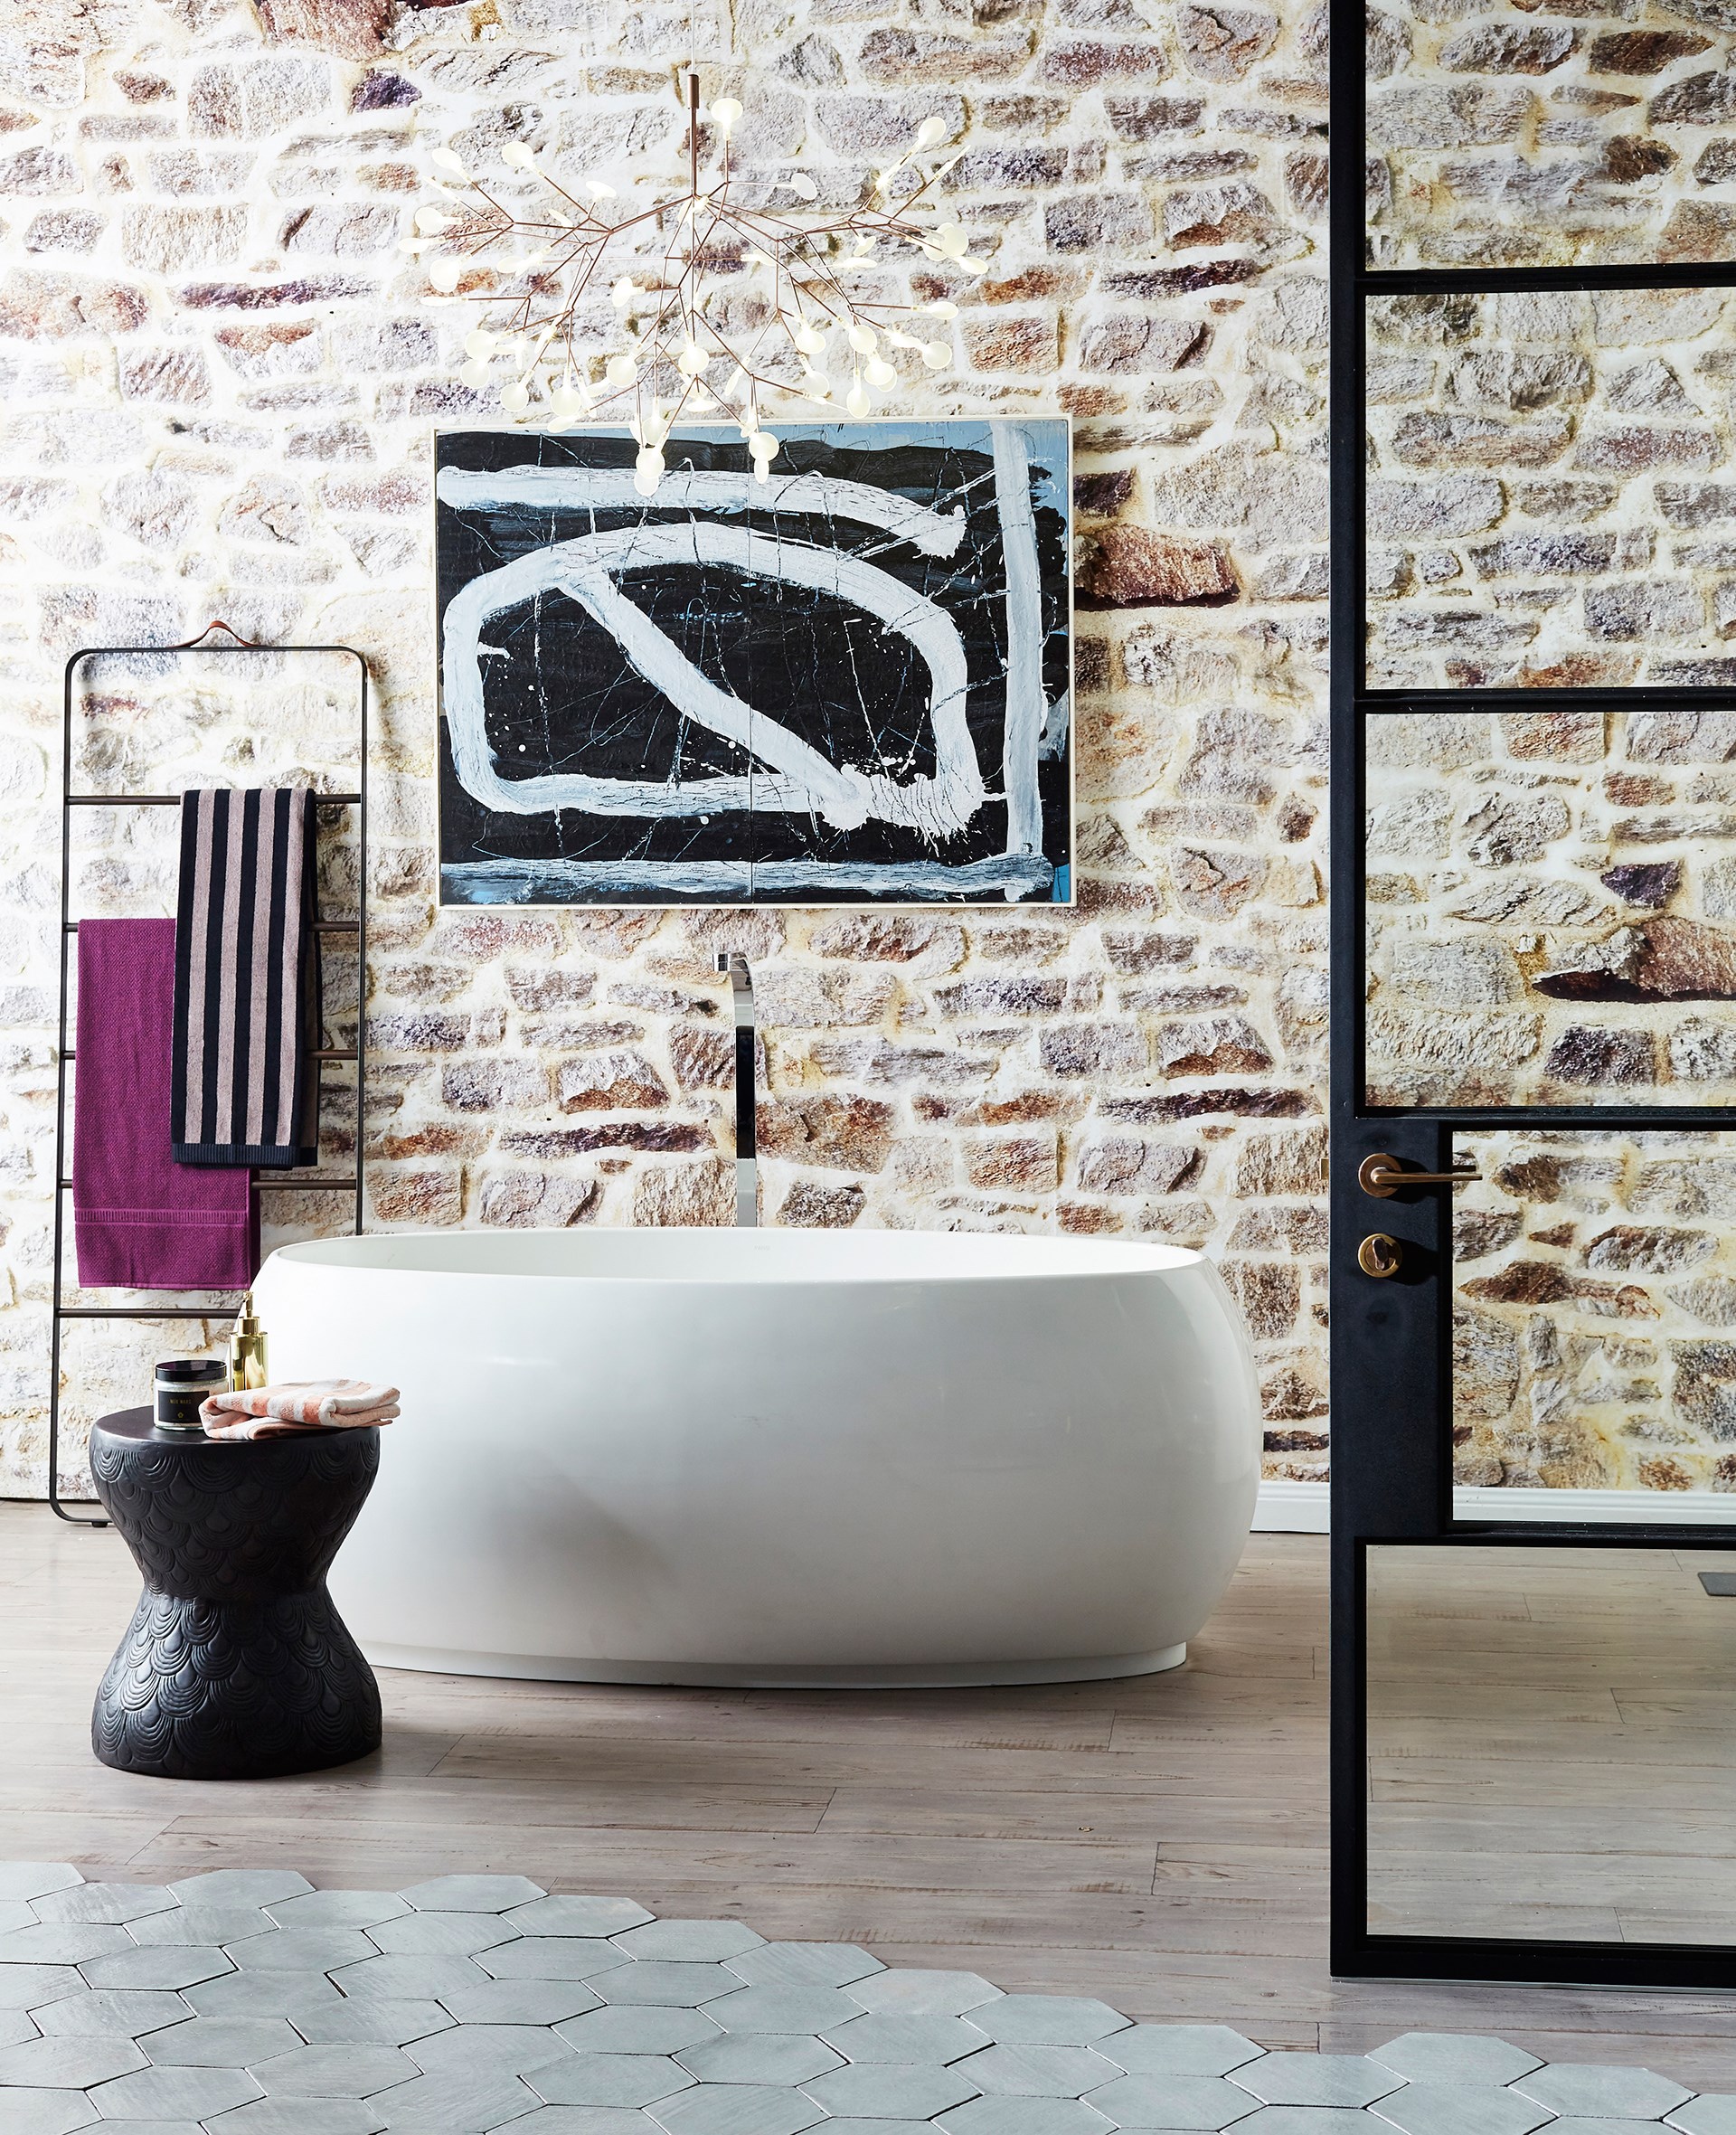 **Art attack.** Hexagonal tiling, an exposed brick wall and contemporary artwork all make great talking points in this light-filled space with a free-standing, luxurious tub. *Photo: John Paul Urizar / bauersyndication.com.au*